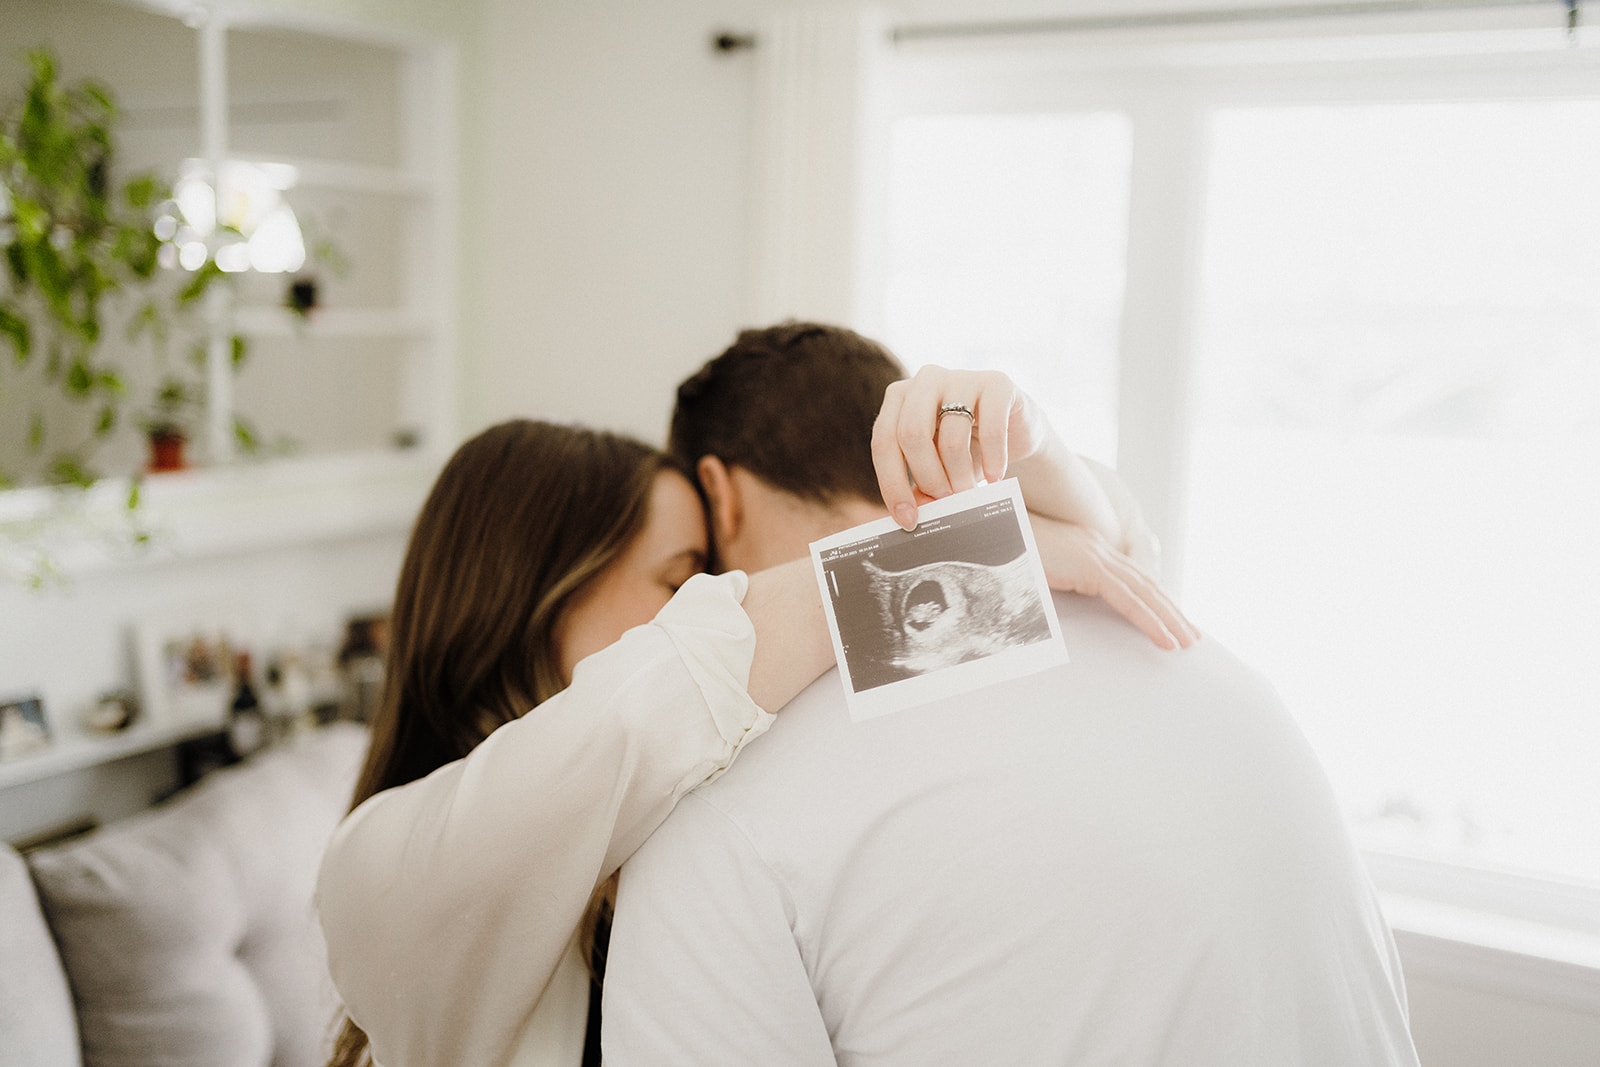 A woman hugging a man around his neck while holding a picture.